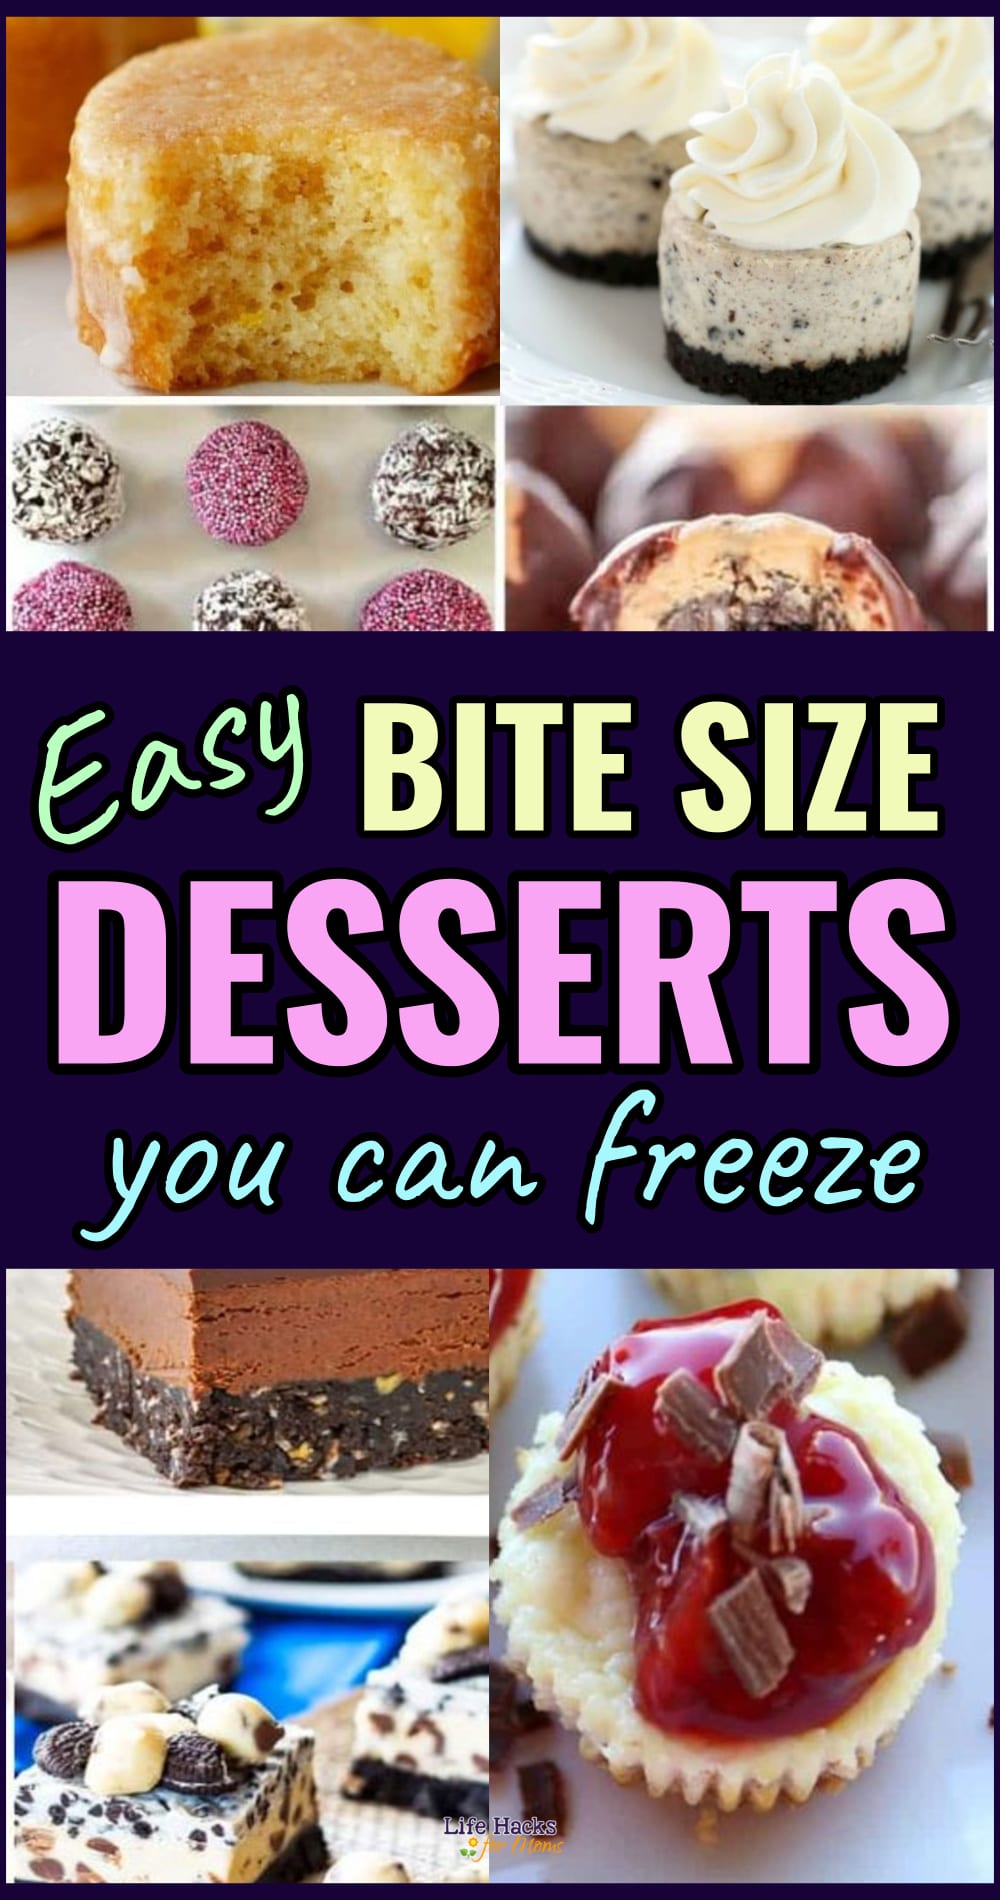 Bite Size Desserts - easy freeable make ahead mini desserts and individual sweet treats you can freeze